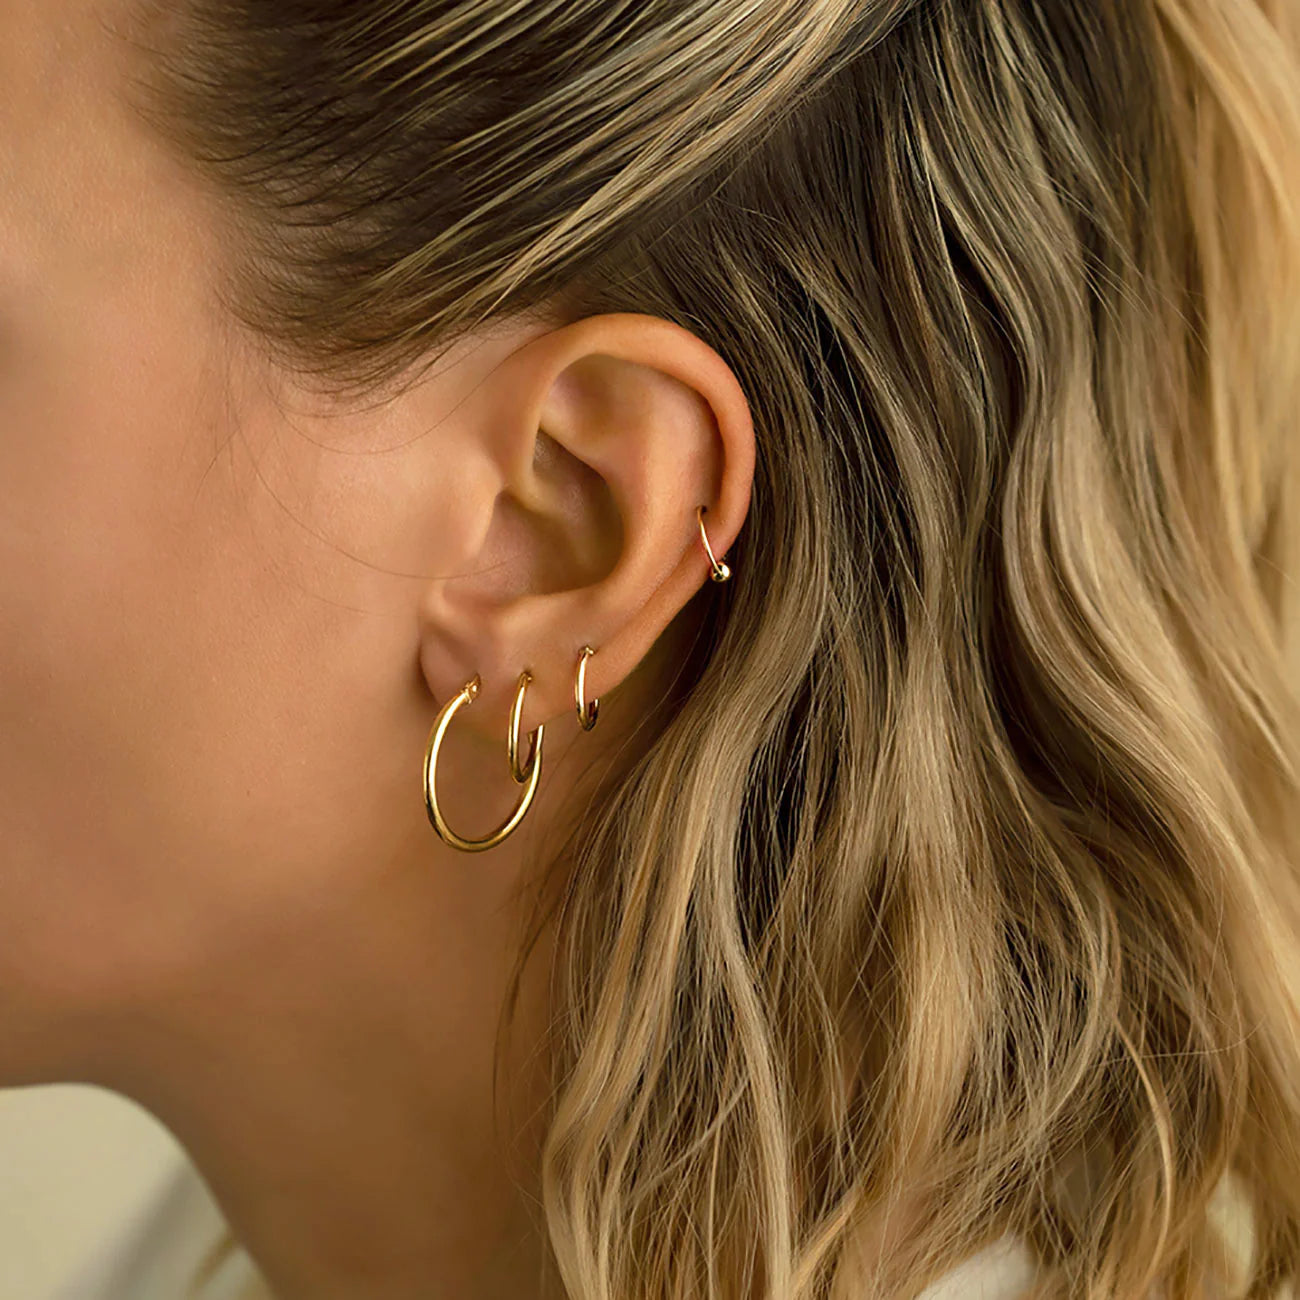 Auricle Piercing : A Guide to This Stylish Cartilage Piercing